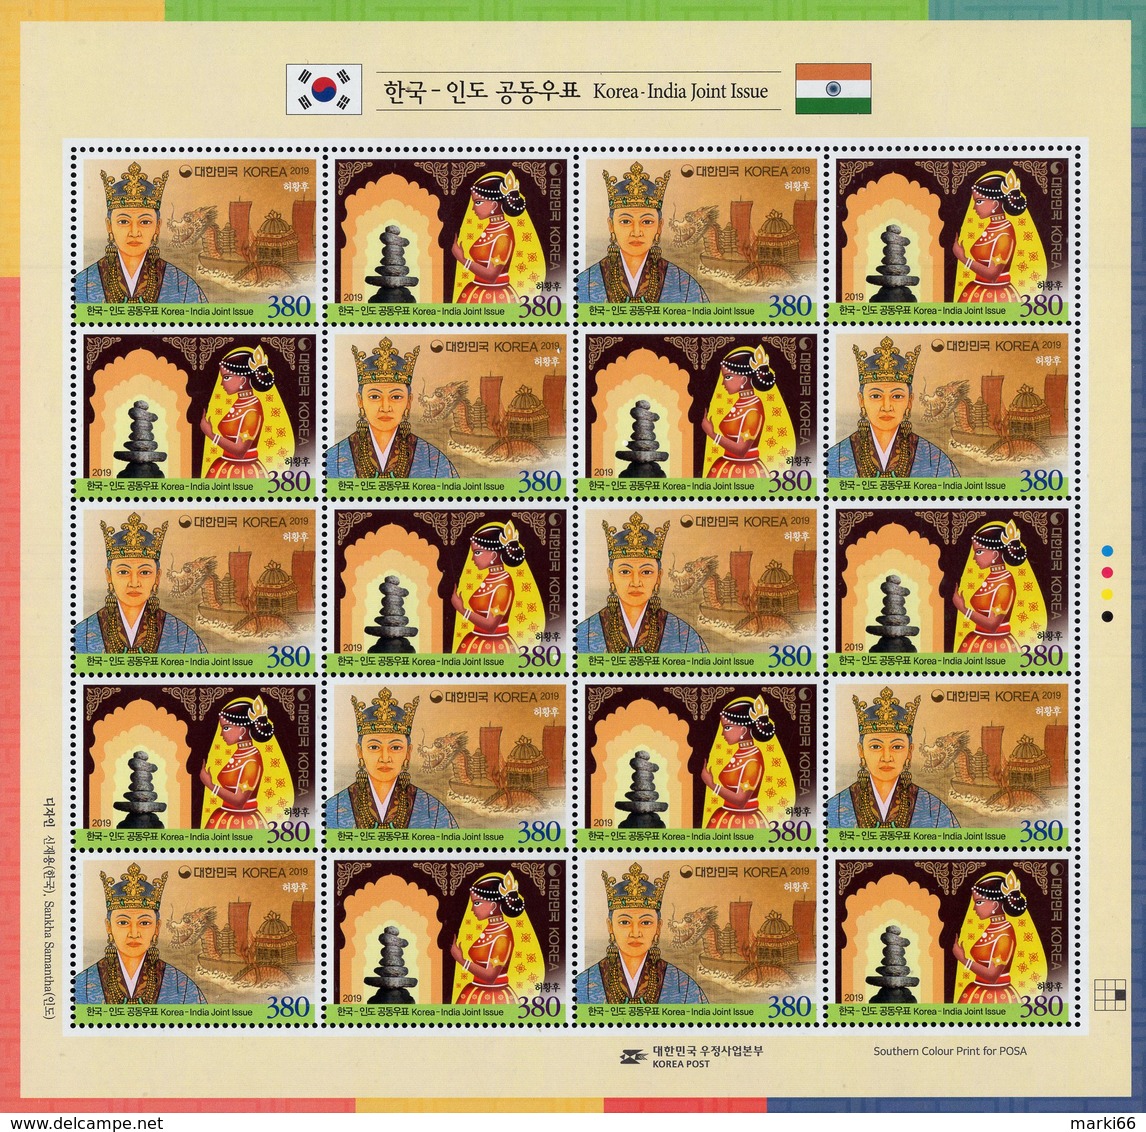 South Korea - 2019 - Queen Heo, Indian-born Korean Queen - Joint Issue With India - Mint Stamp Sheet - Korea, South